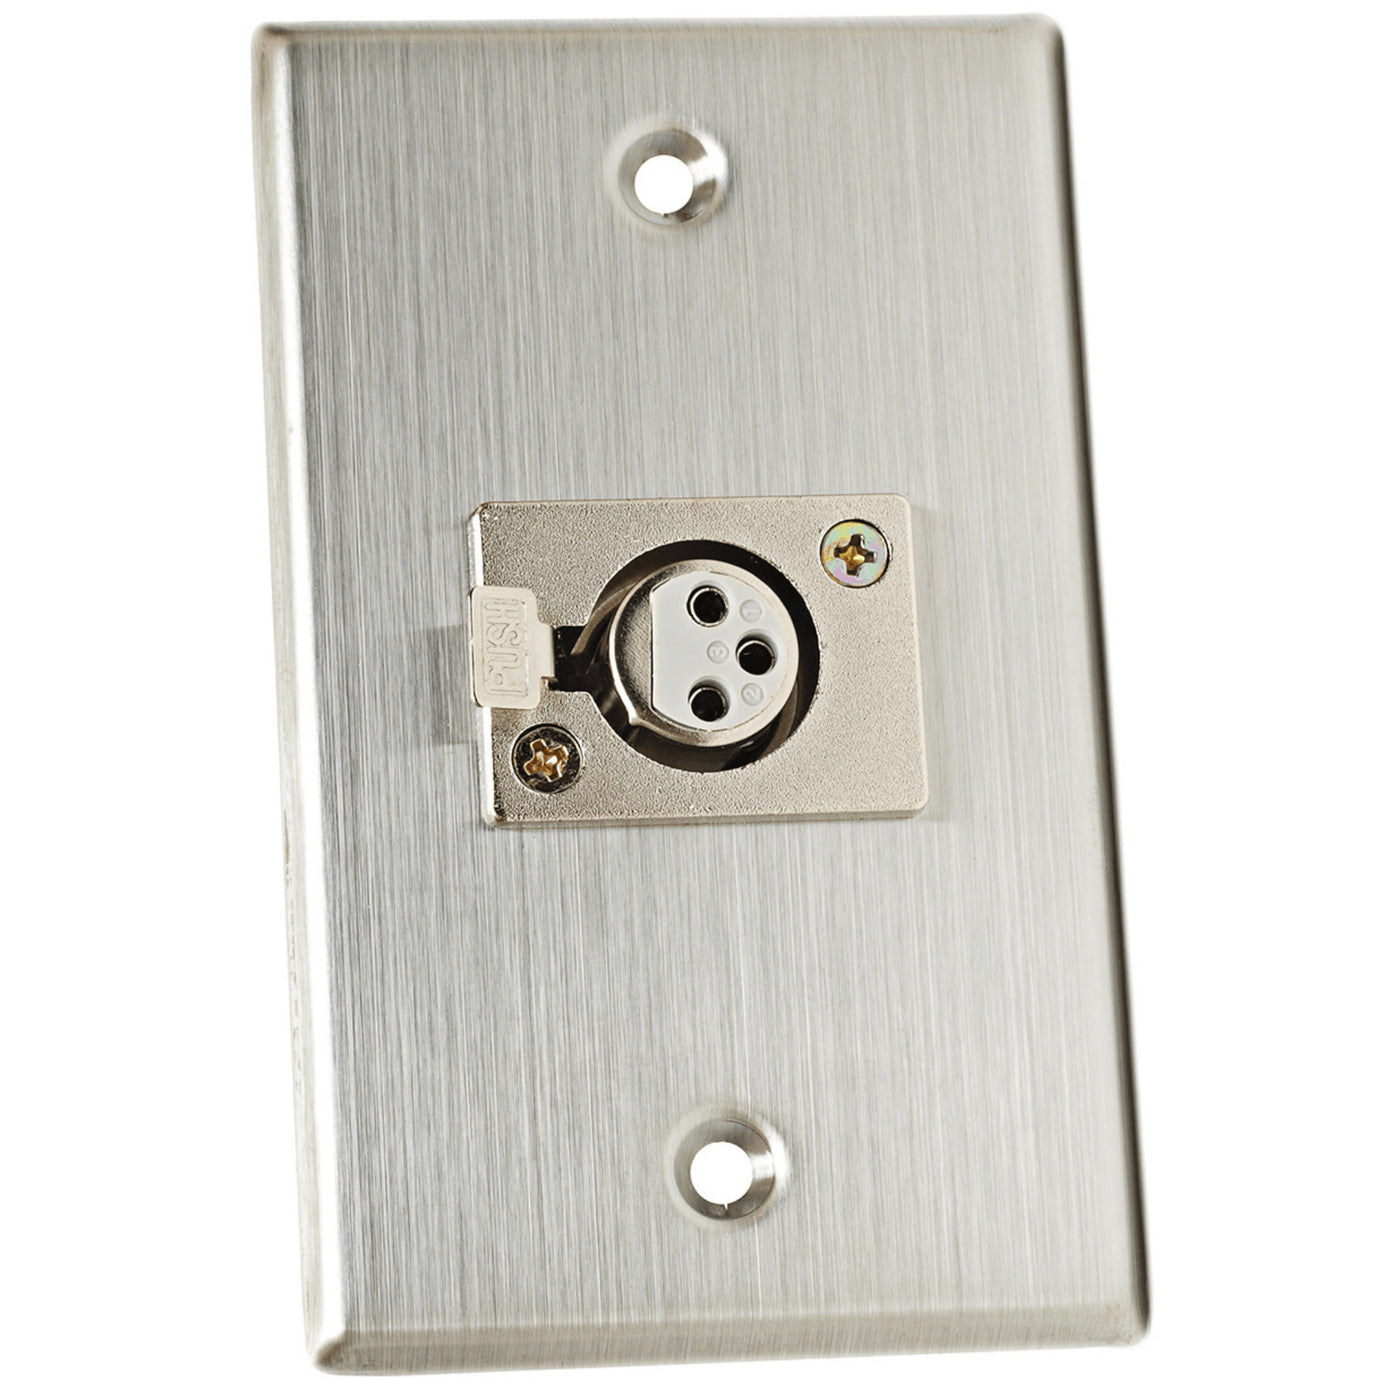 Astatic 40-347 Single Gang Stainless Steel Wall Plate with XLR-F